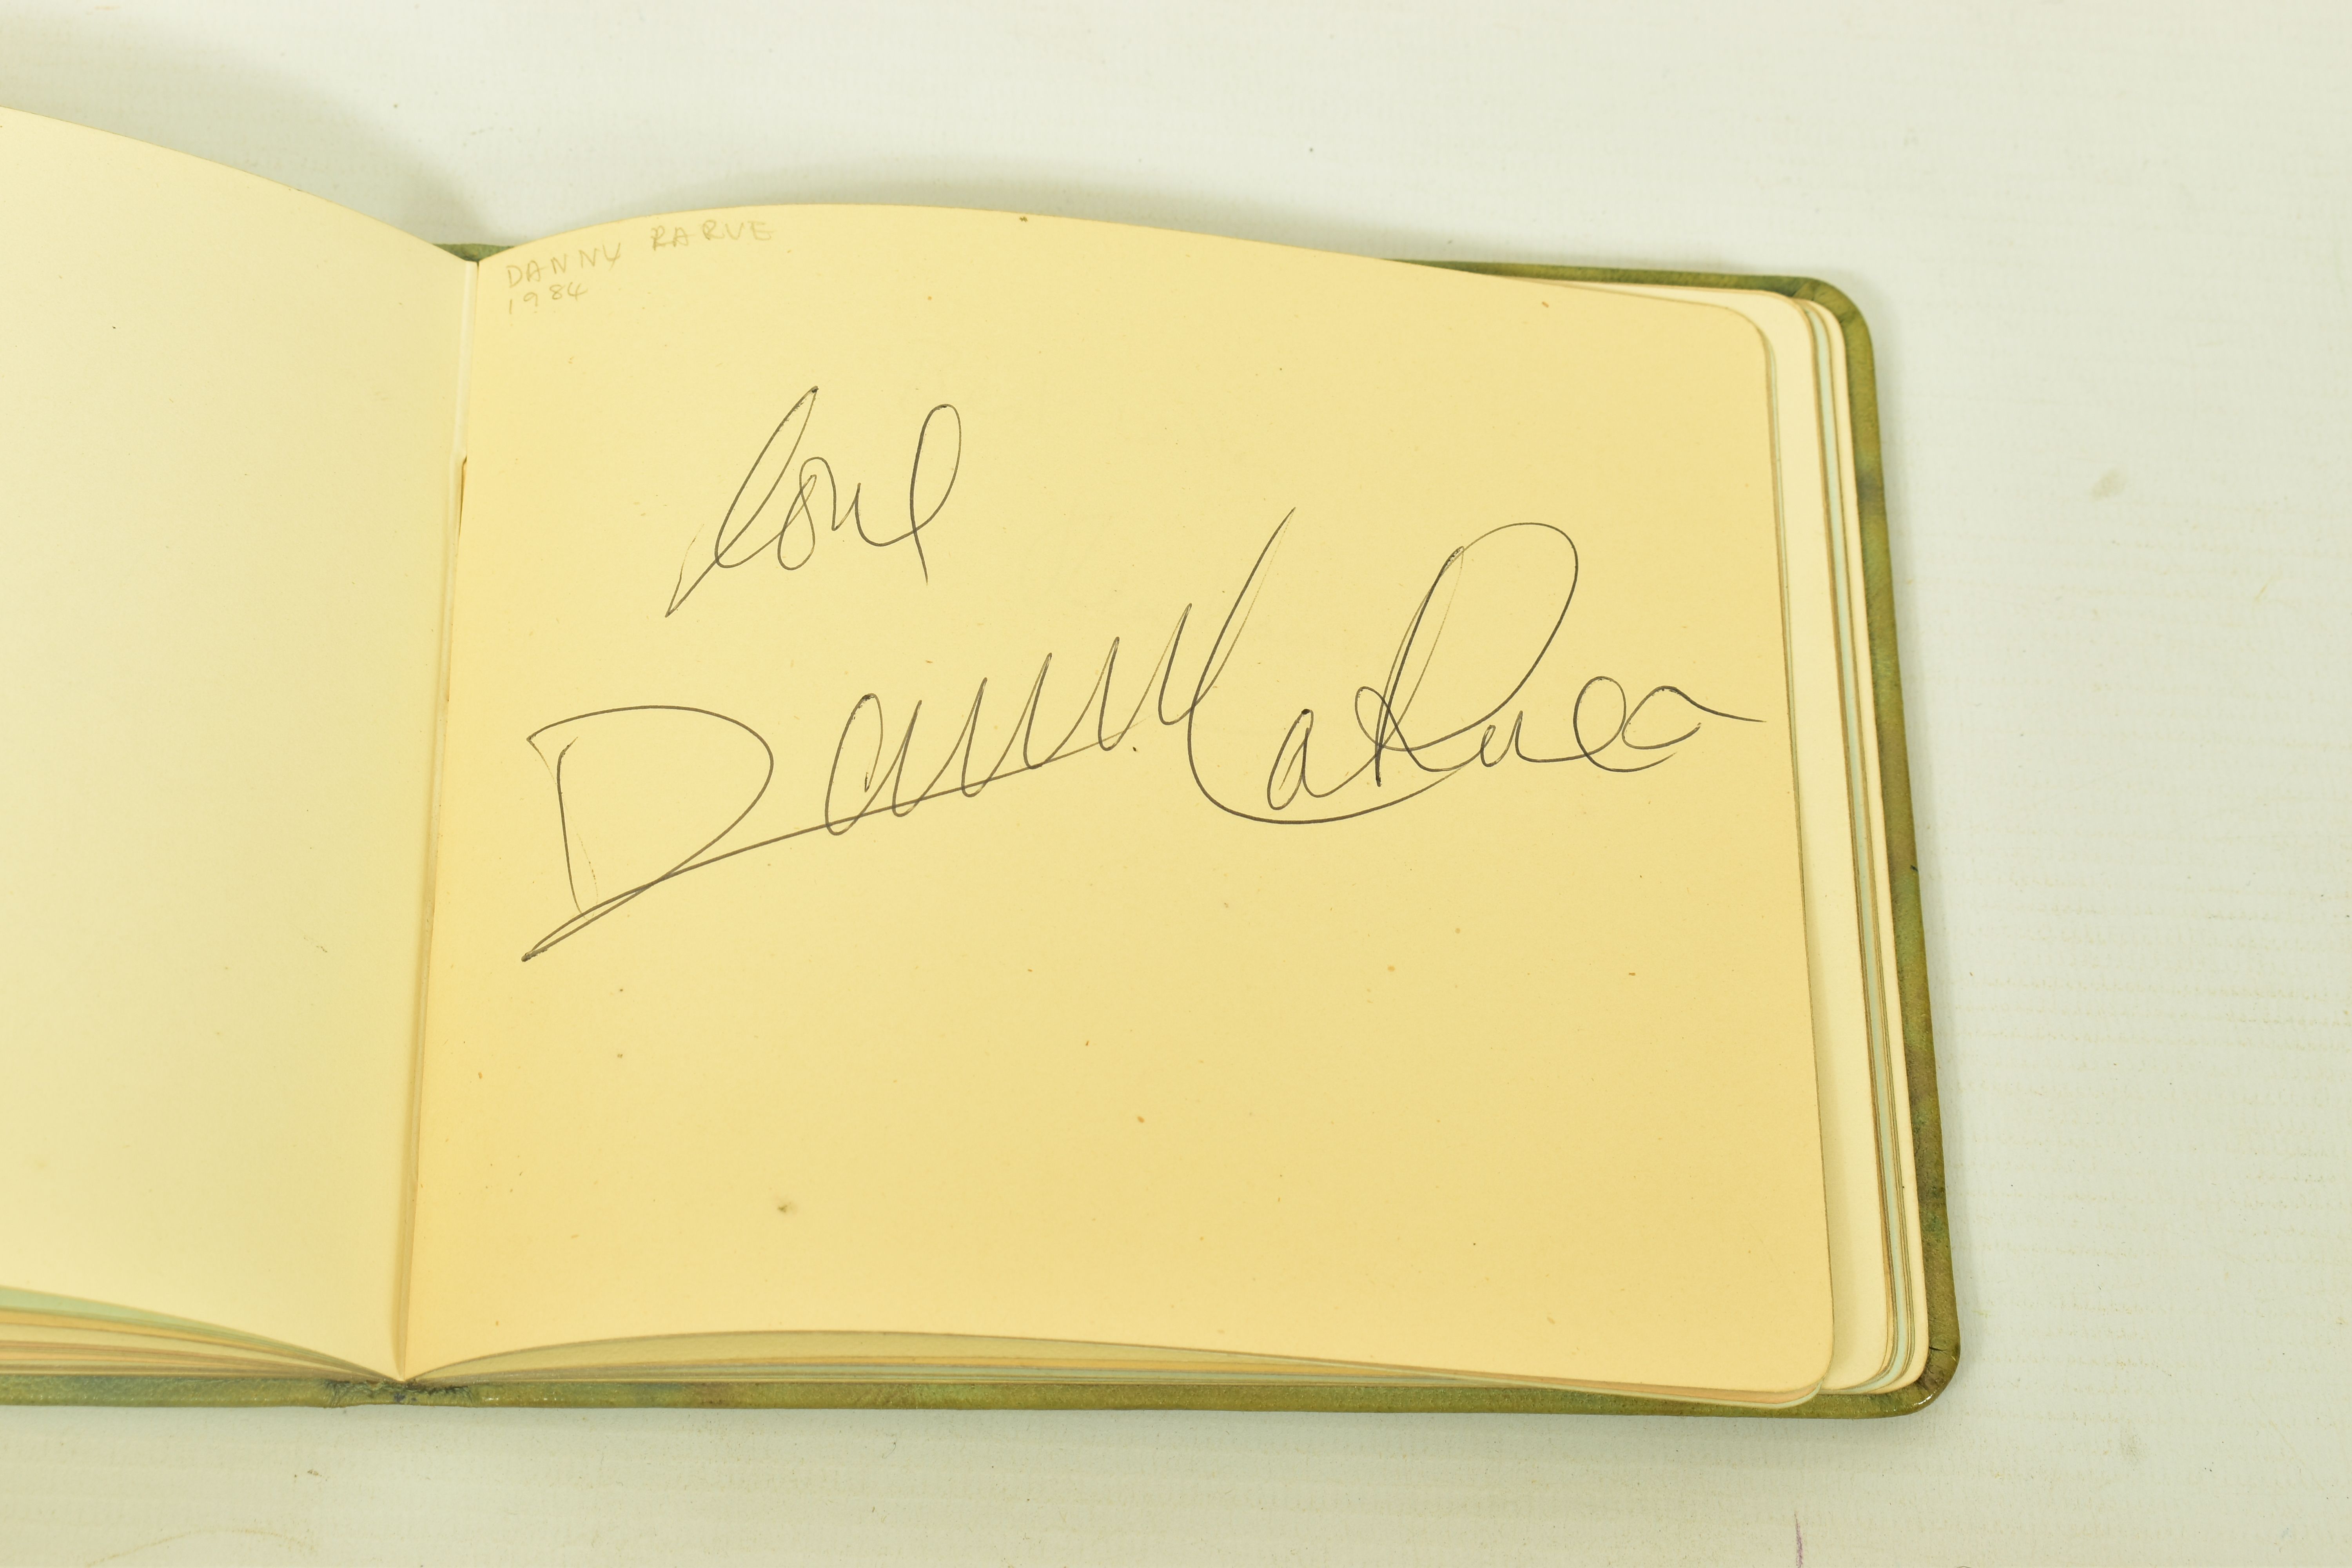 FILM & STAGE AUTOGRAPH ALBUM, a collection of signatures in an autograph album featuring some of the - Image 7 of 12